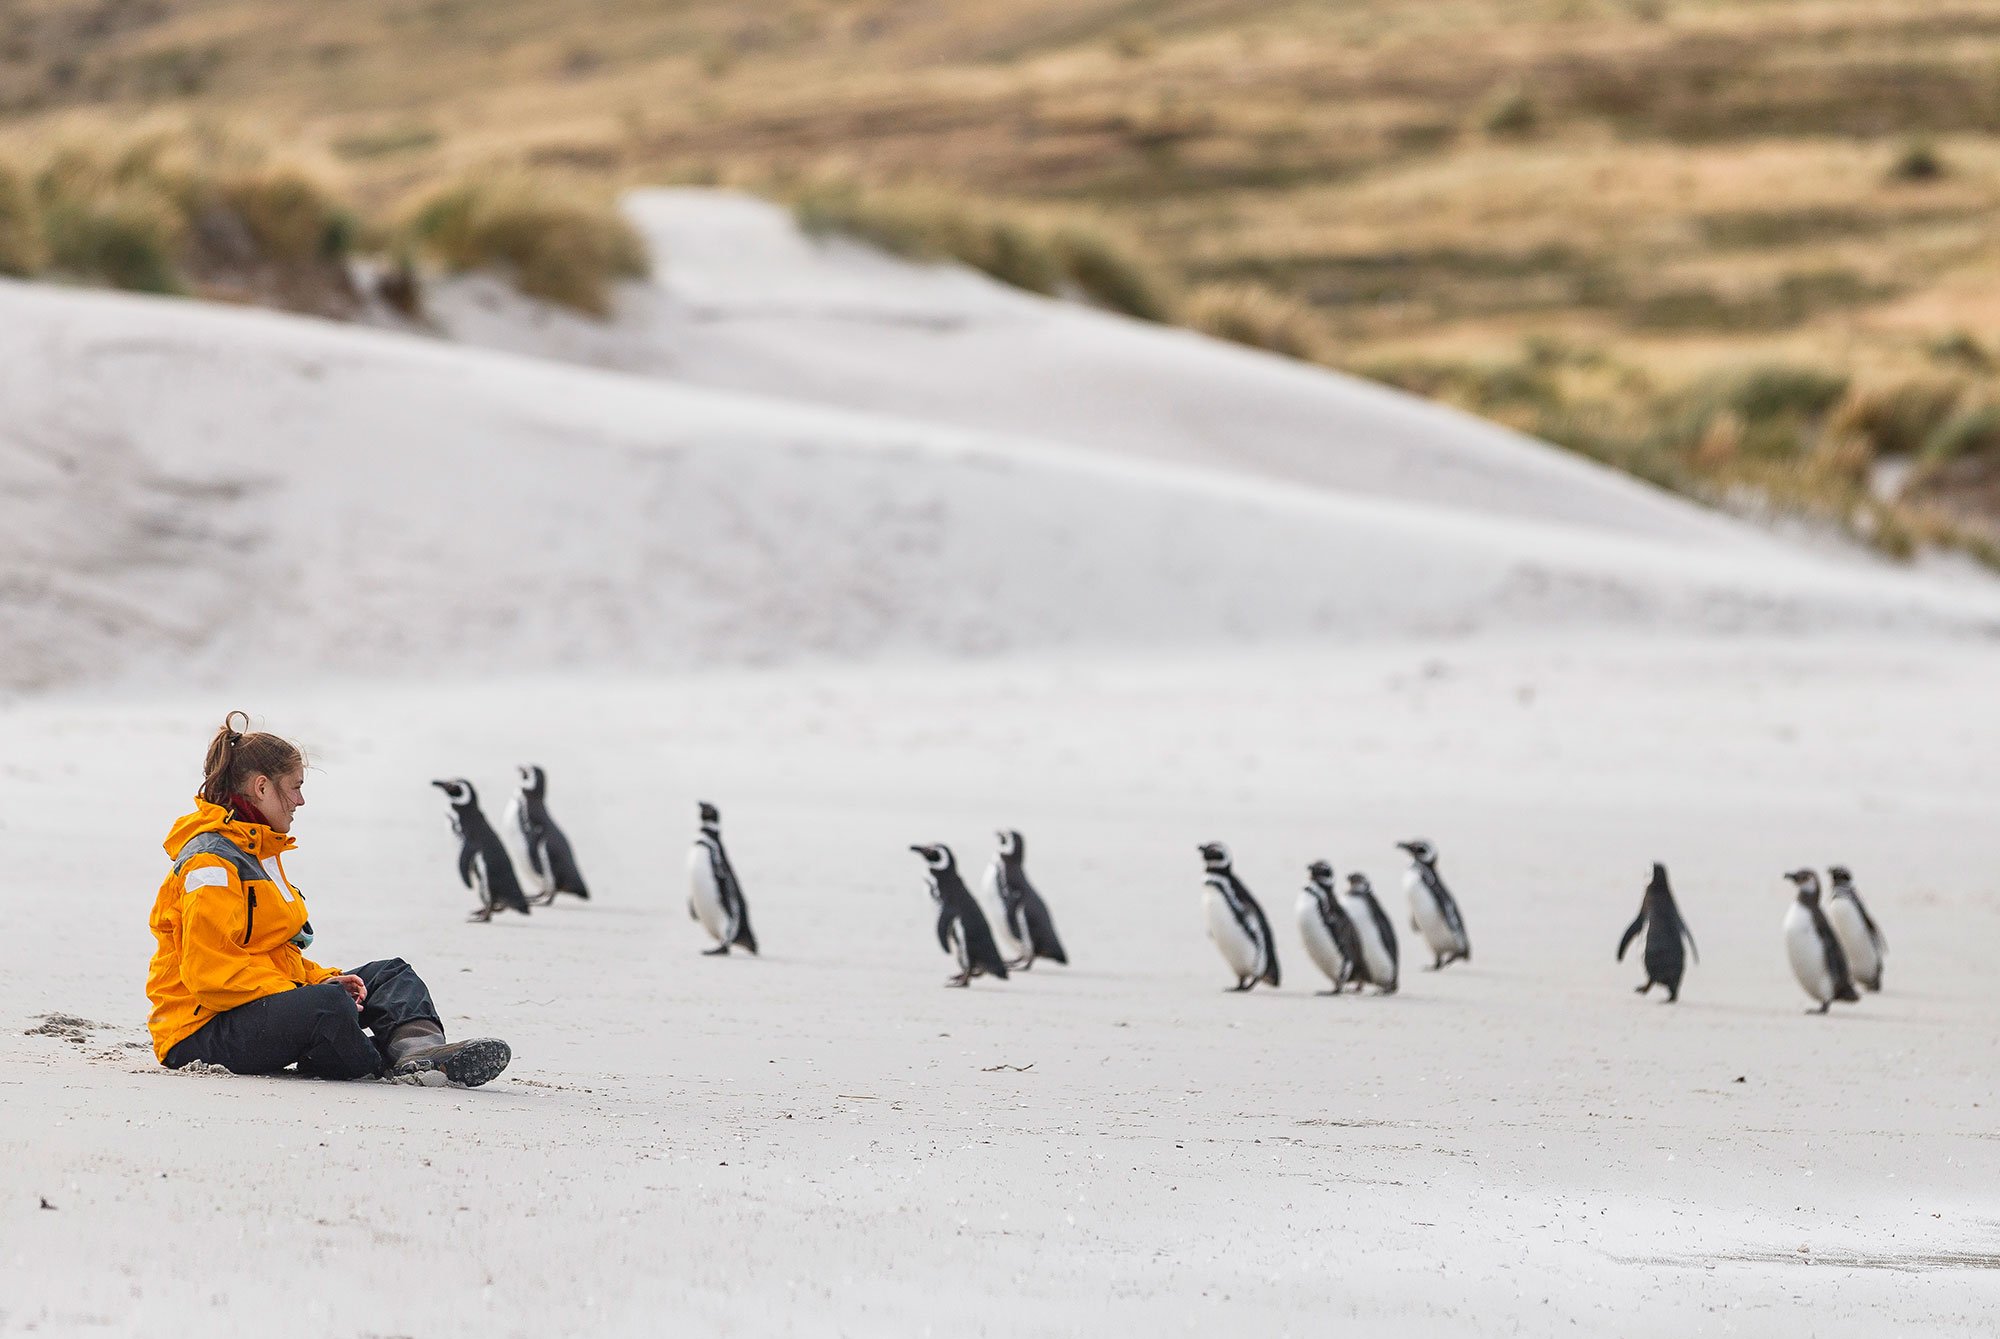 Magellanic penguins are curious about a Quark Expeditions guest at Carcass Island in the Falkland Islands.